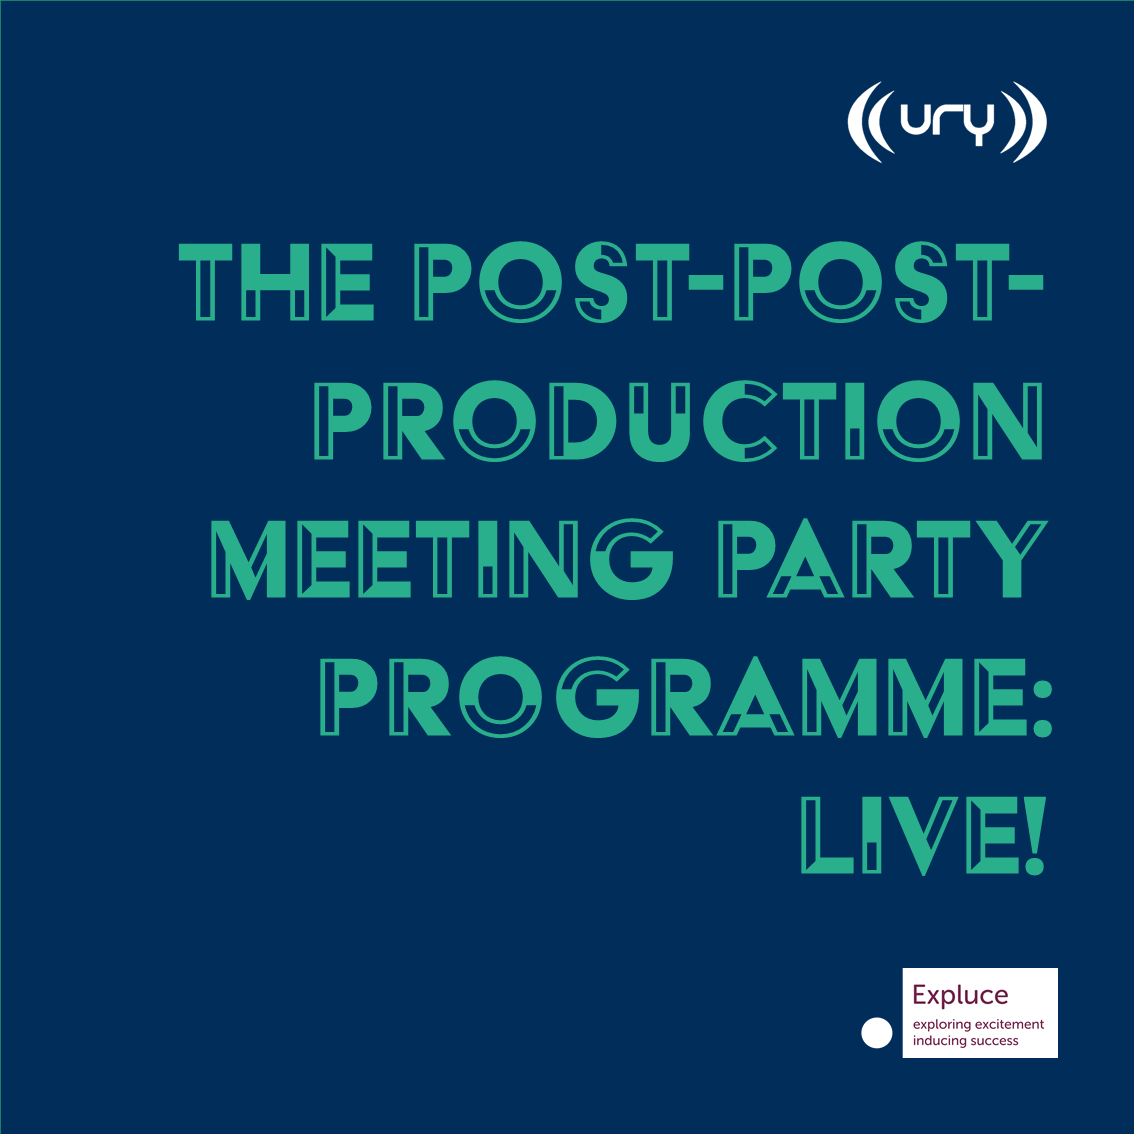 The Post-Post-Production Meeting Party Programme: Live! Logo